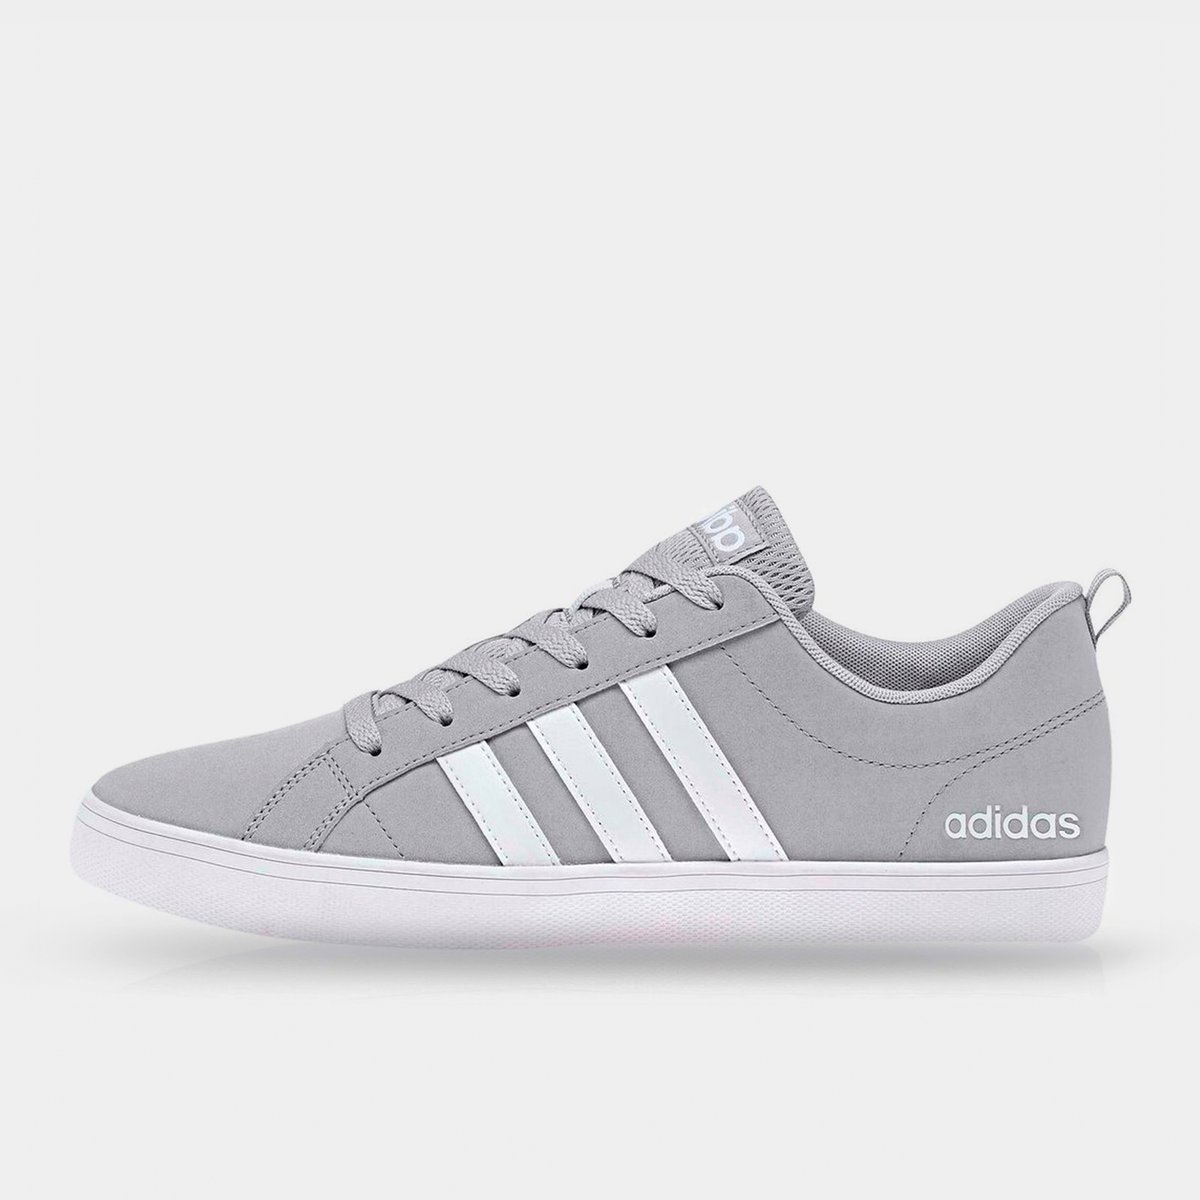 adidas pace vs mens trainers white